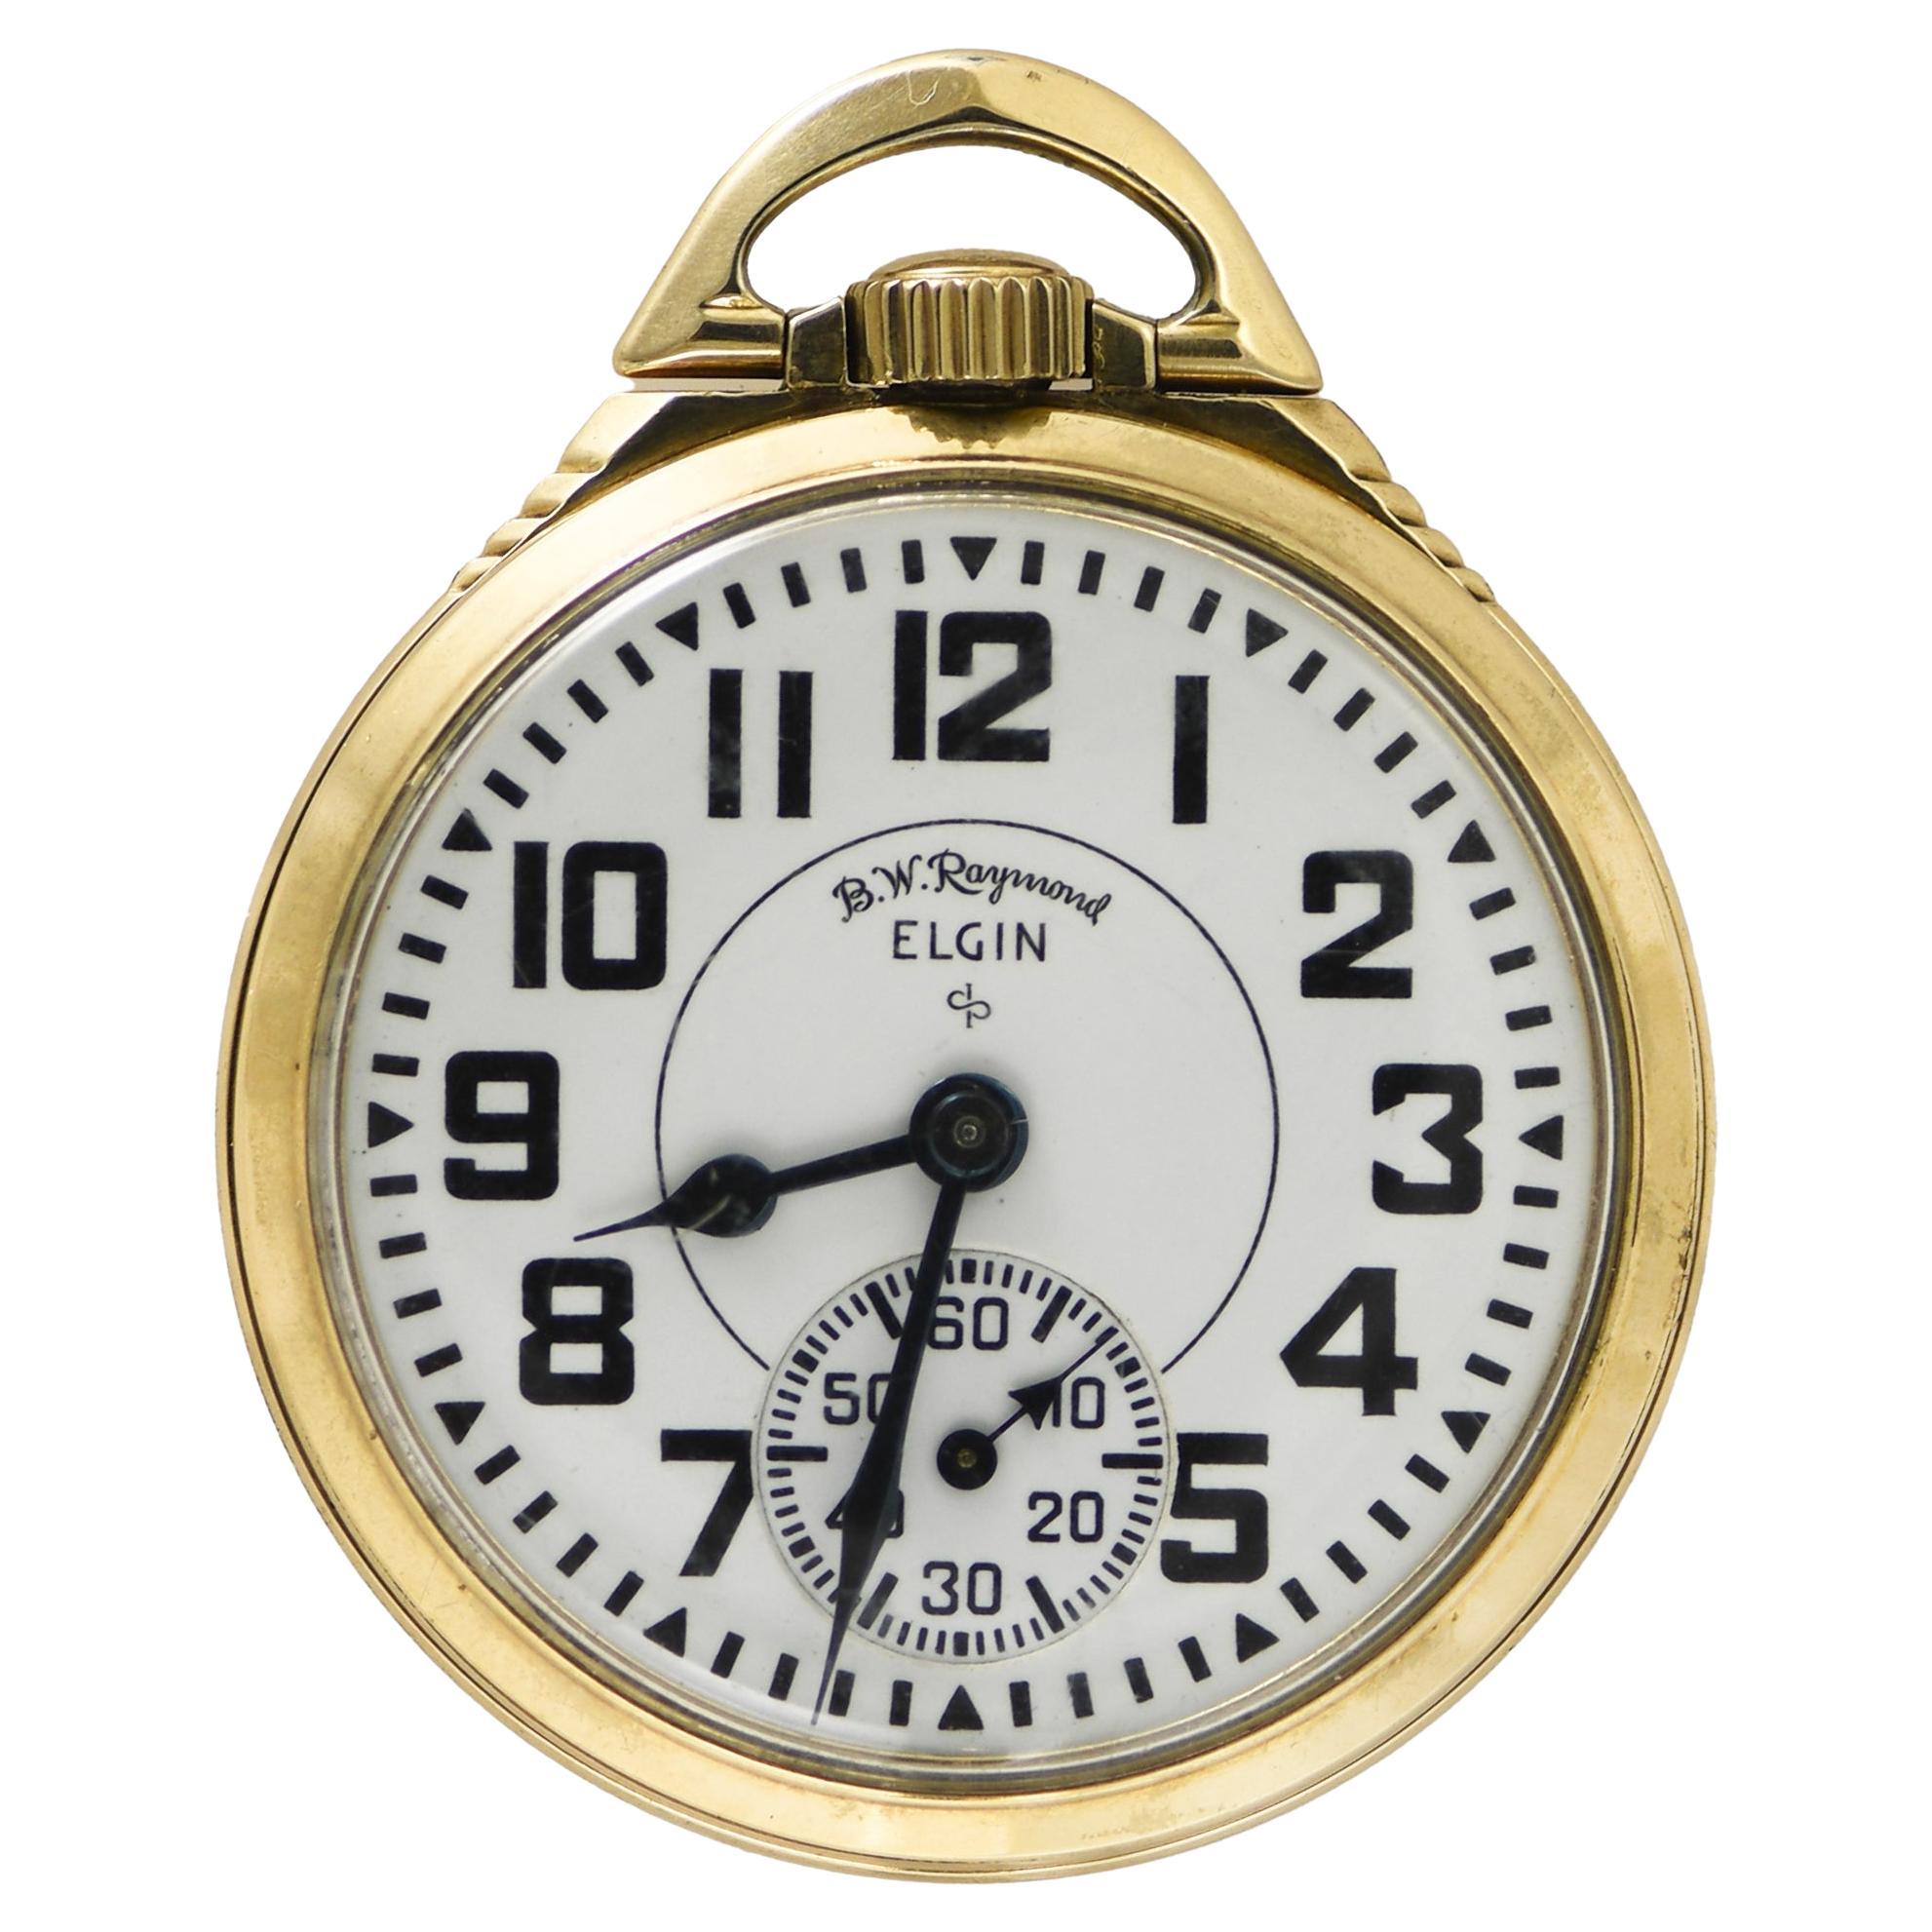 Are Elgin watches real gold?